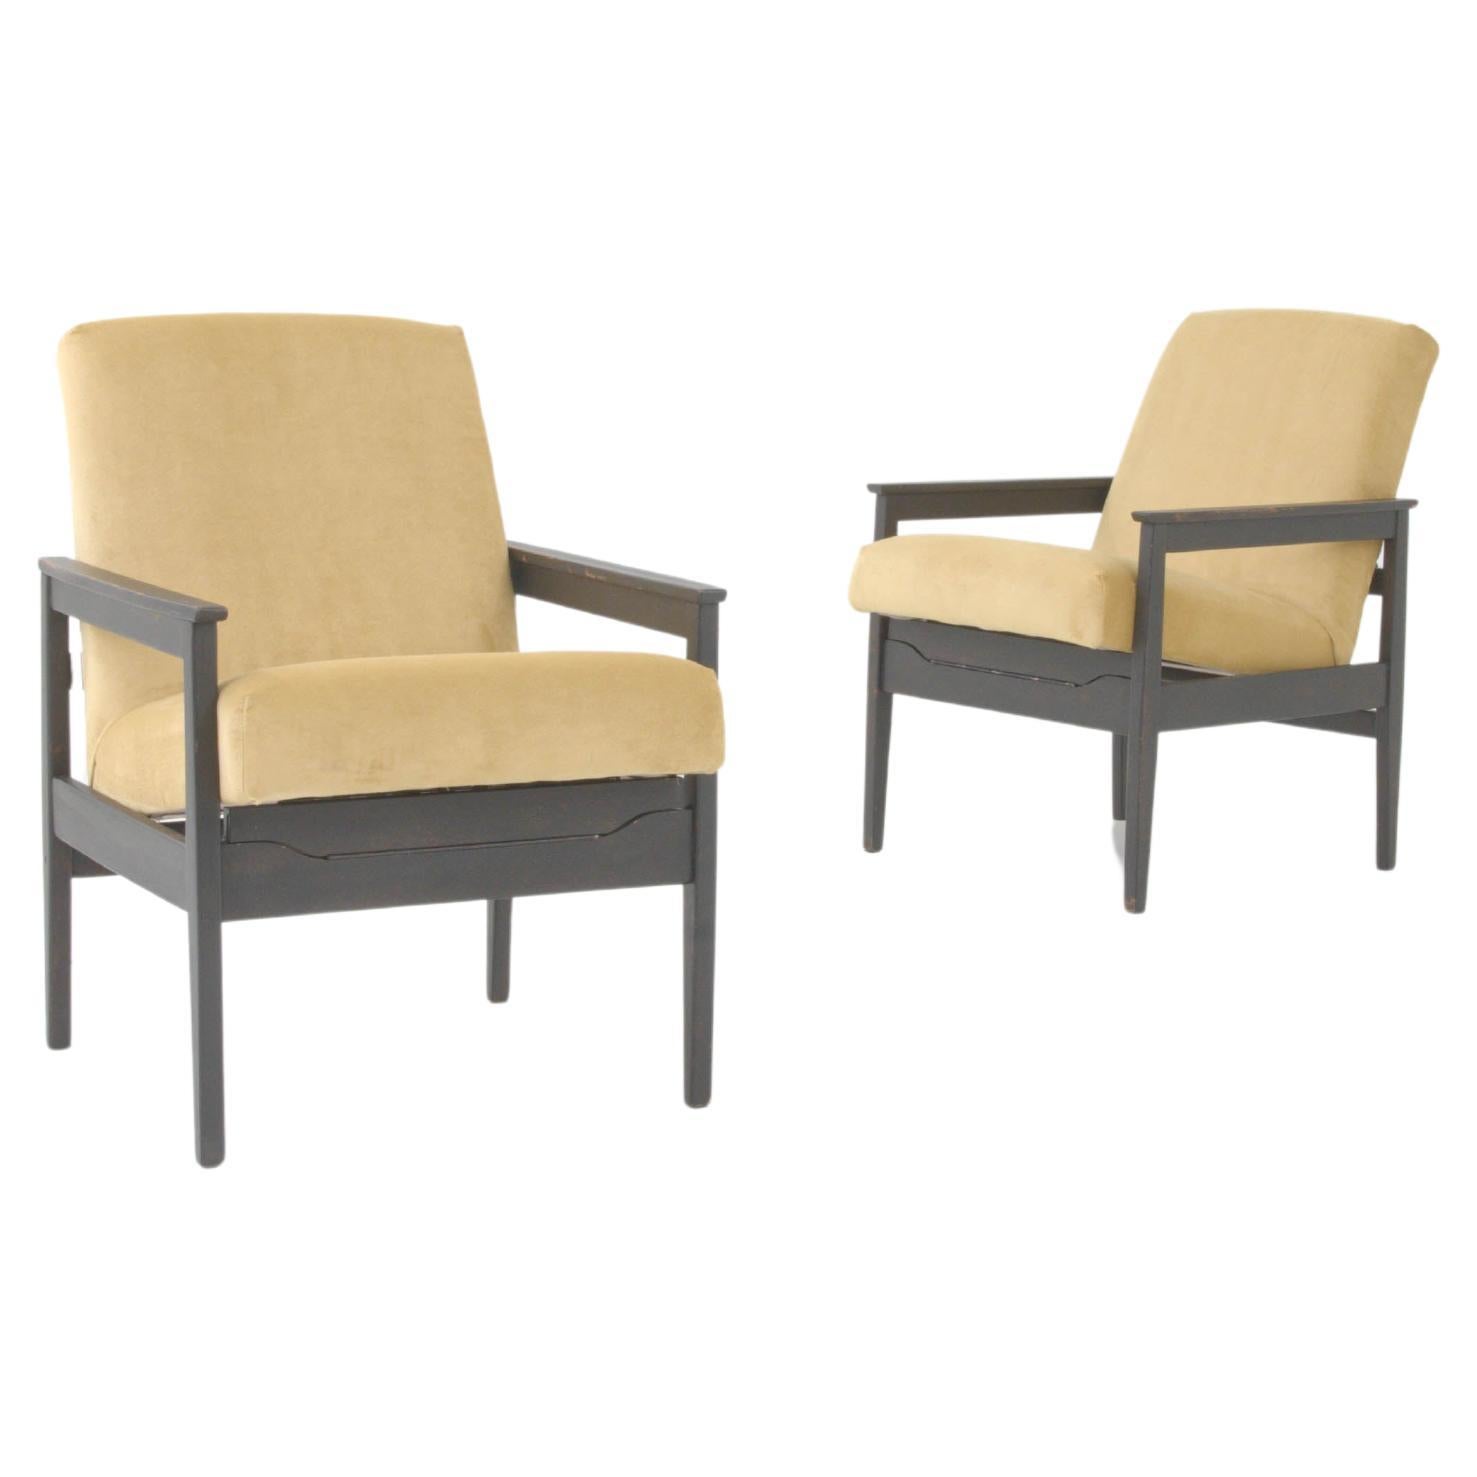 1960s, Czech Upholstered Armchairs, Set of 2 For Sale